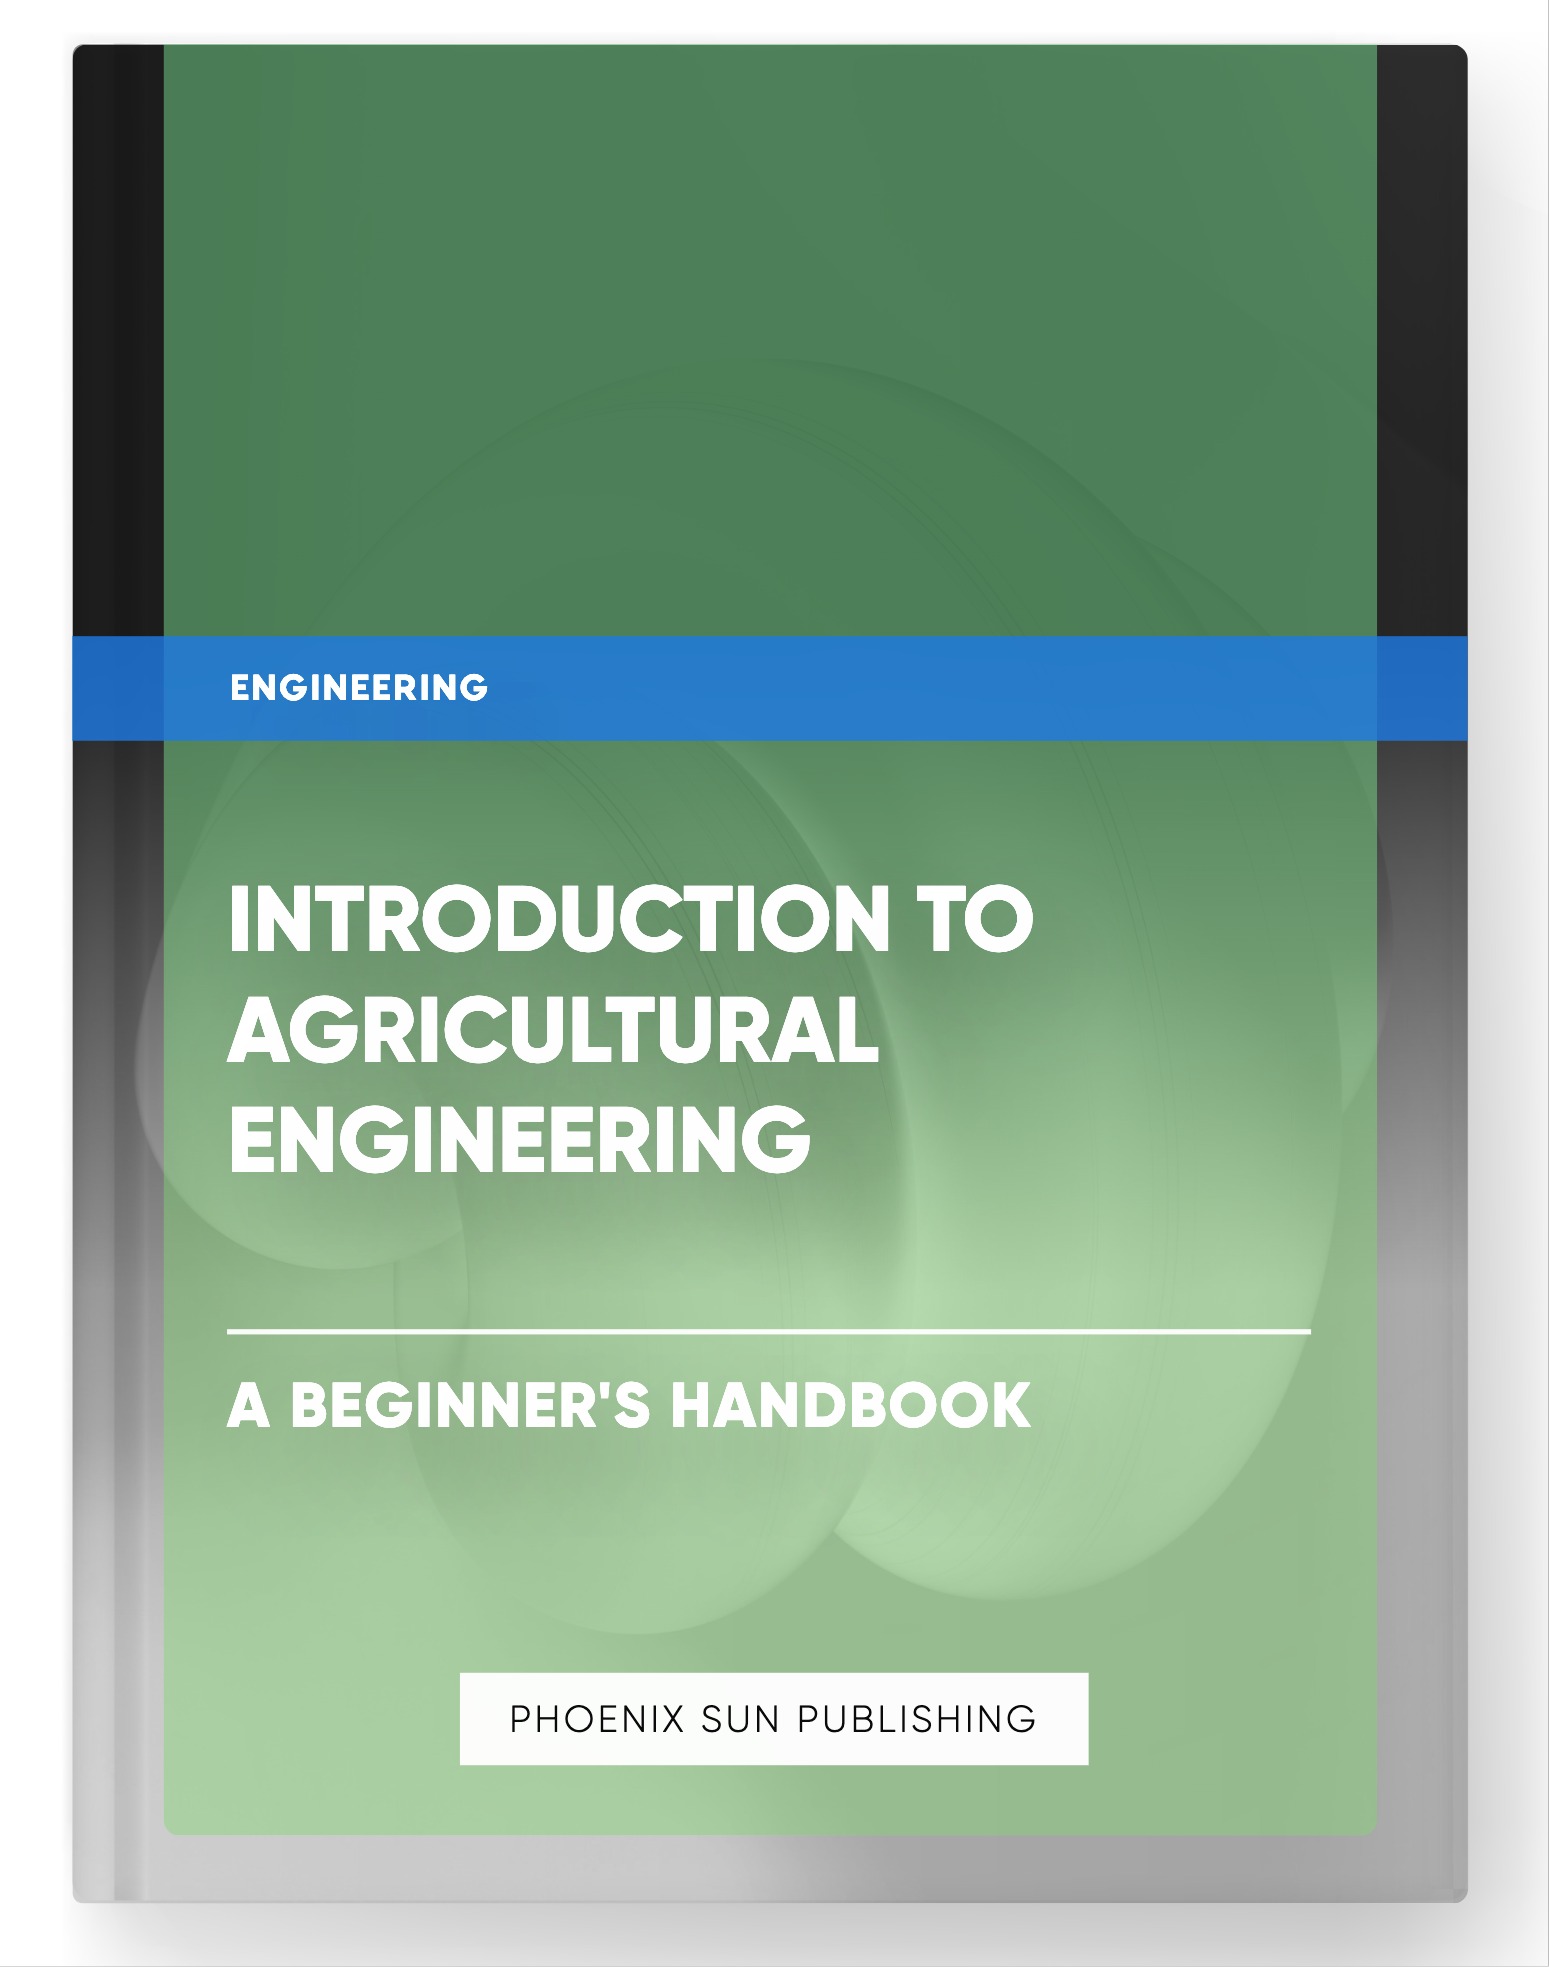 Introduction to Agricultural Engineering – A Beginner’s Handbook